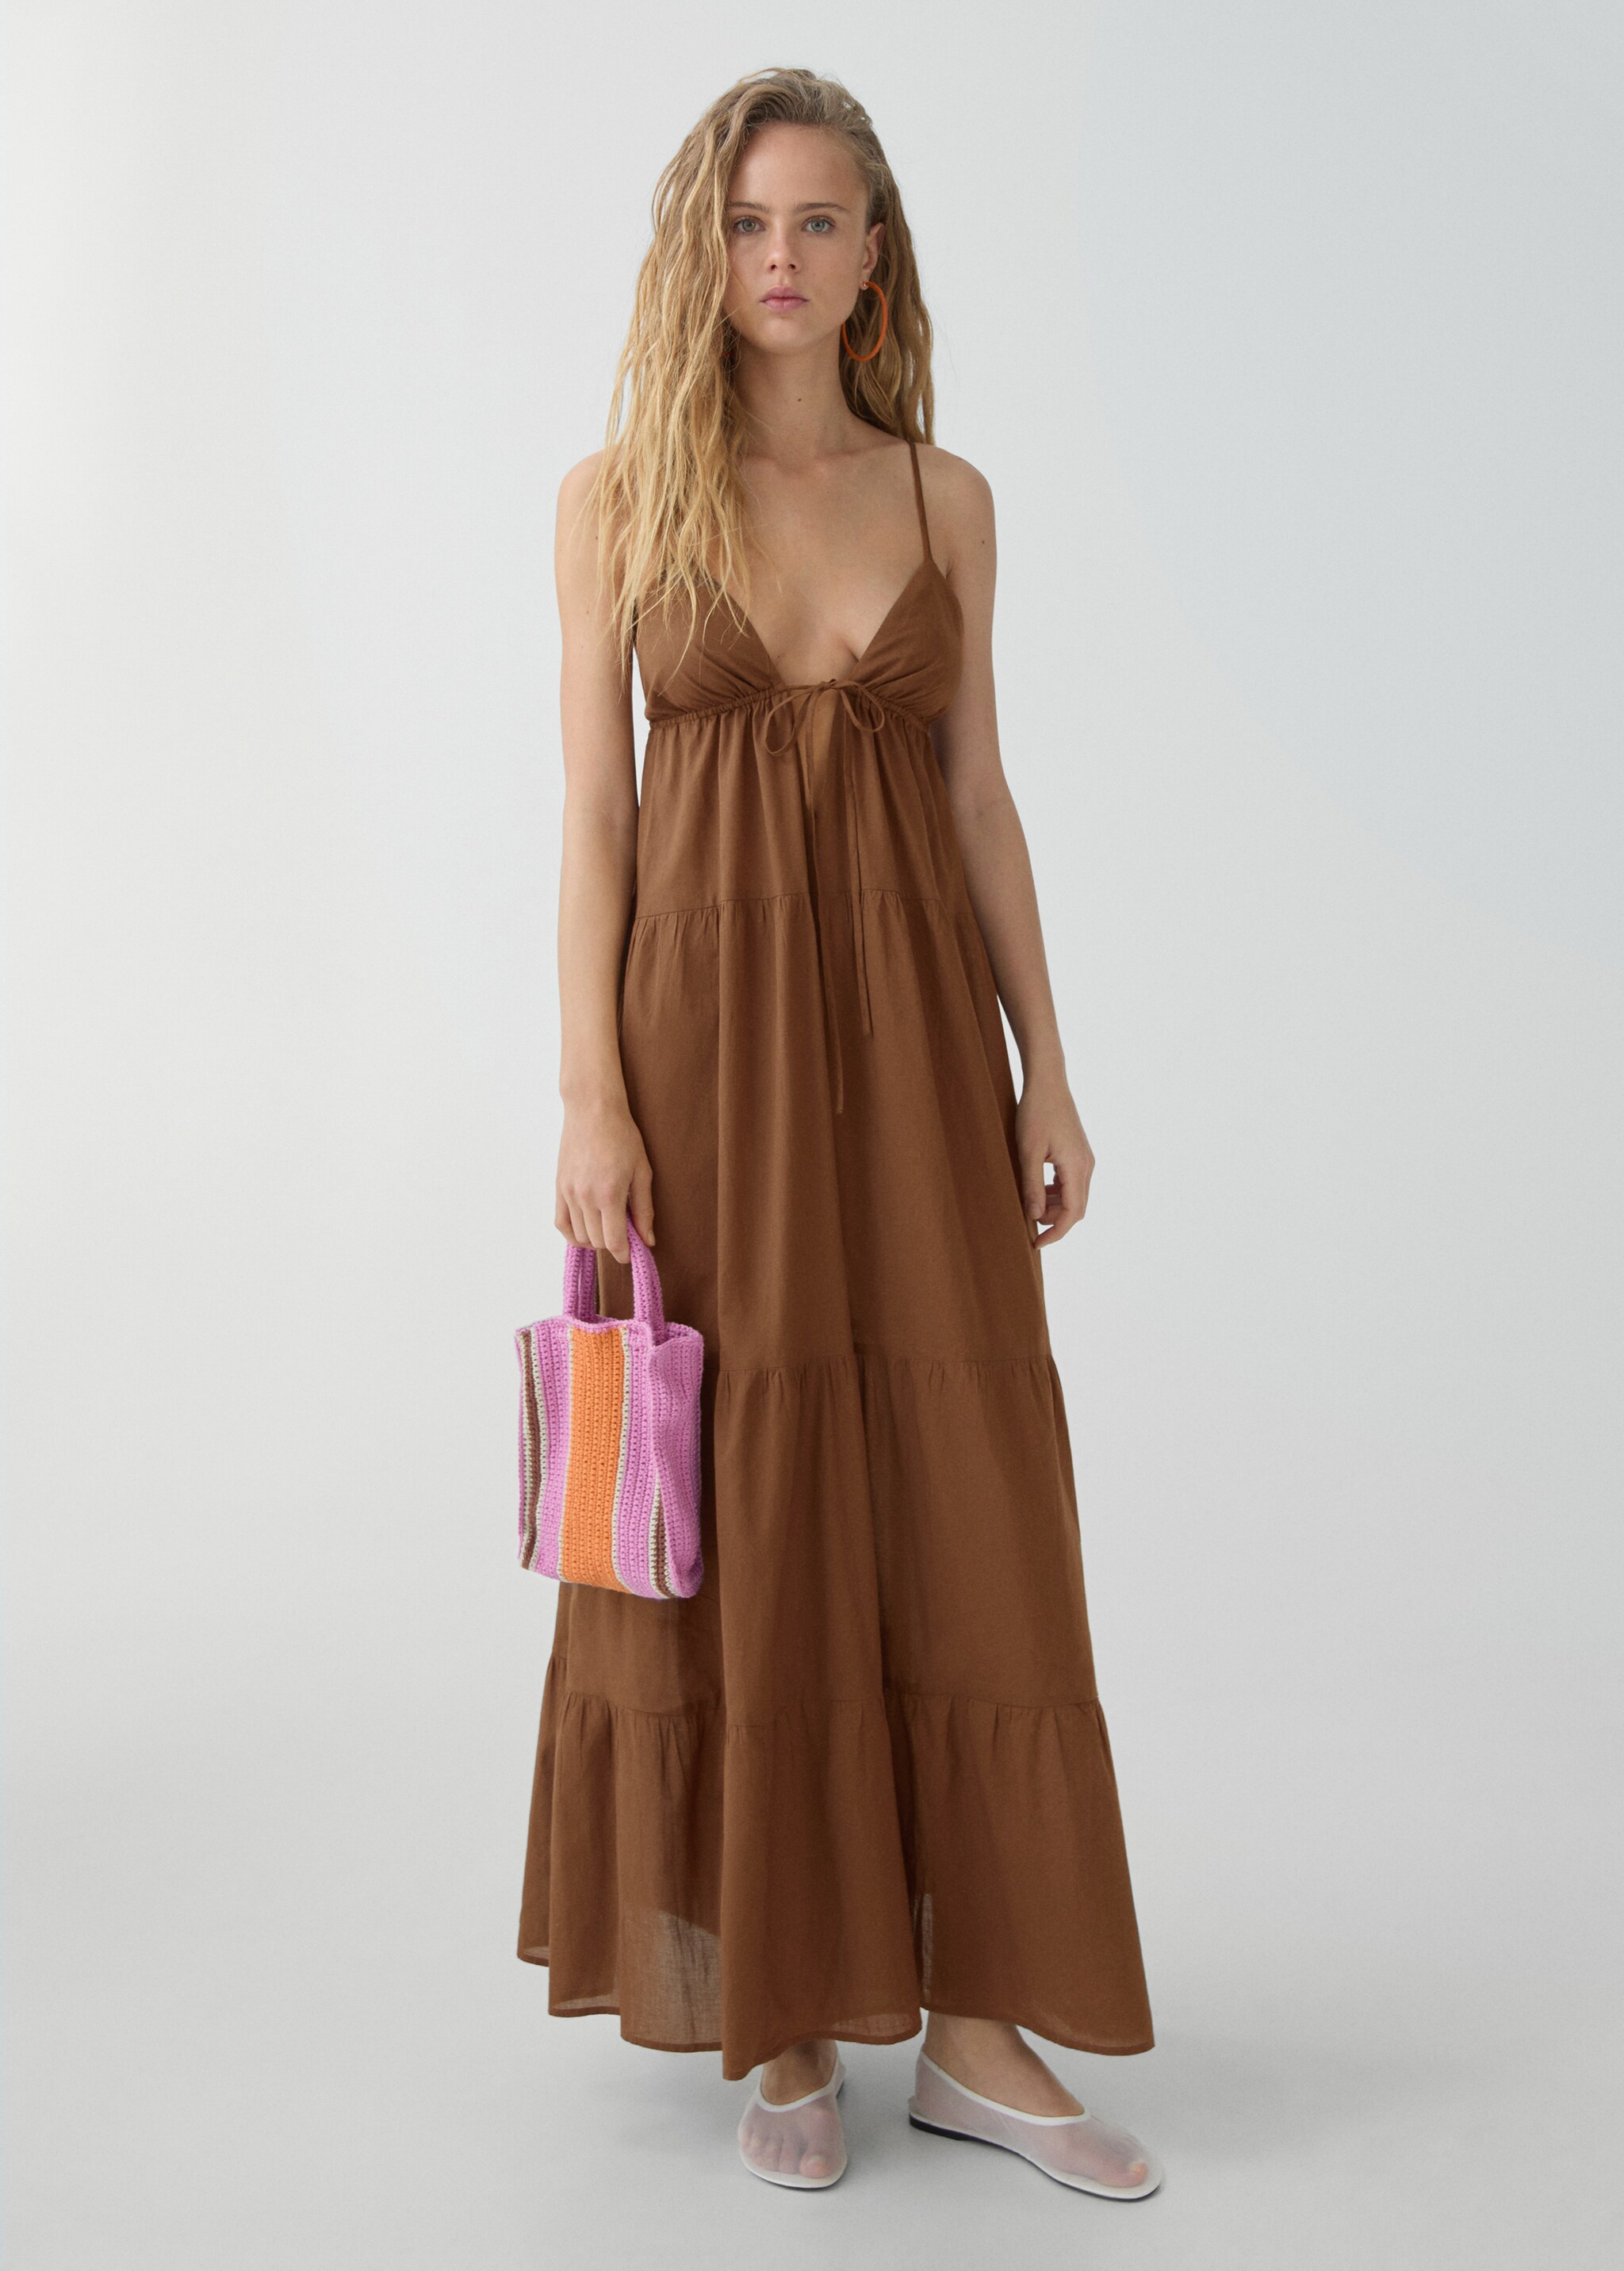 Long dress with bow neckline - General plane